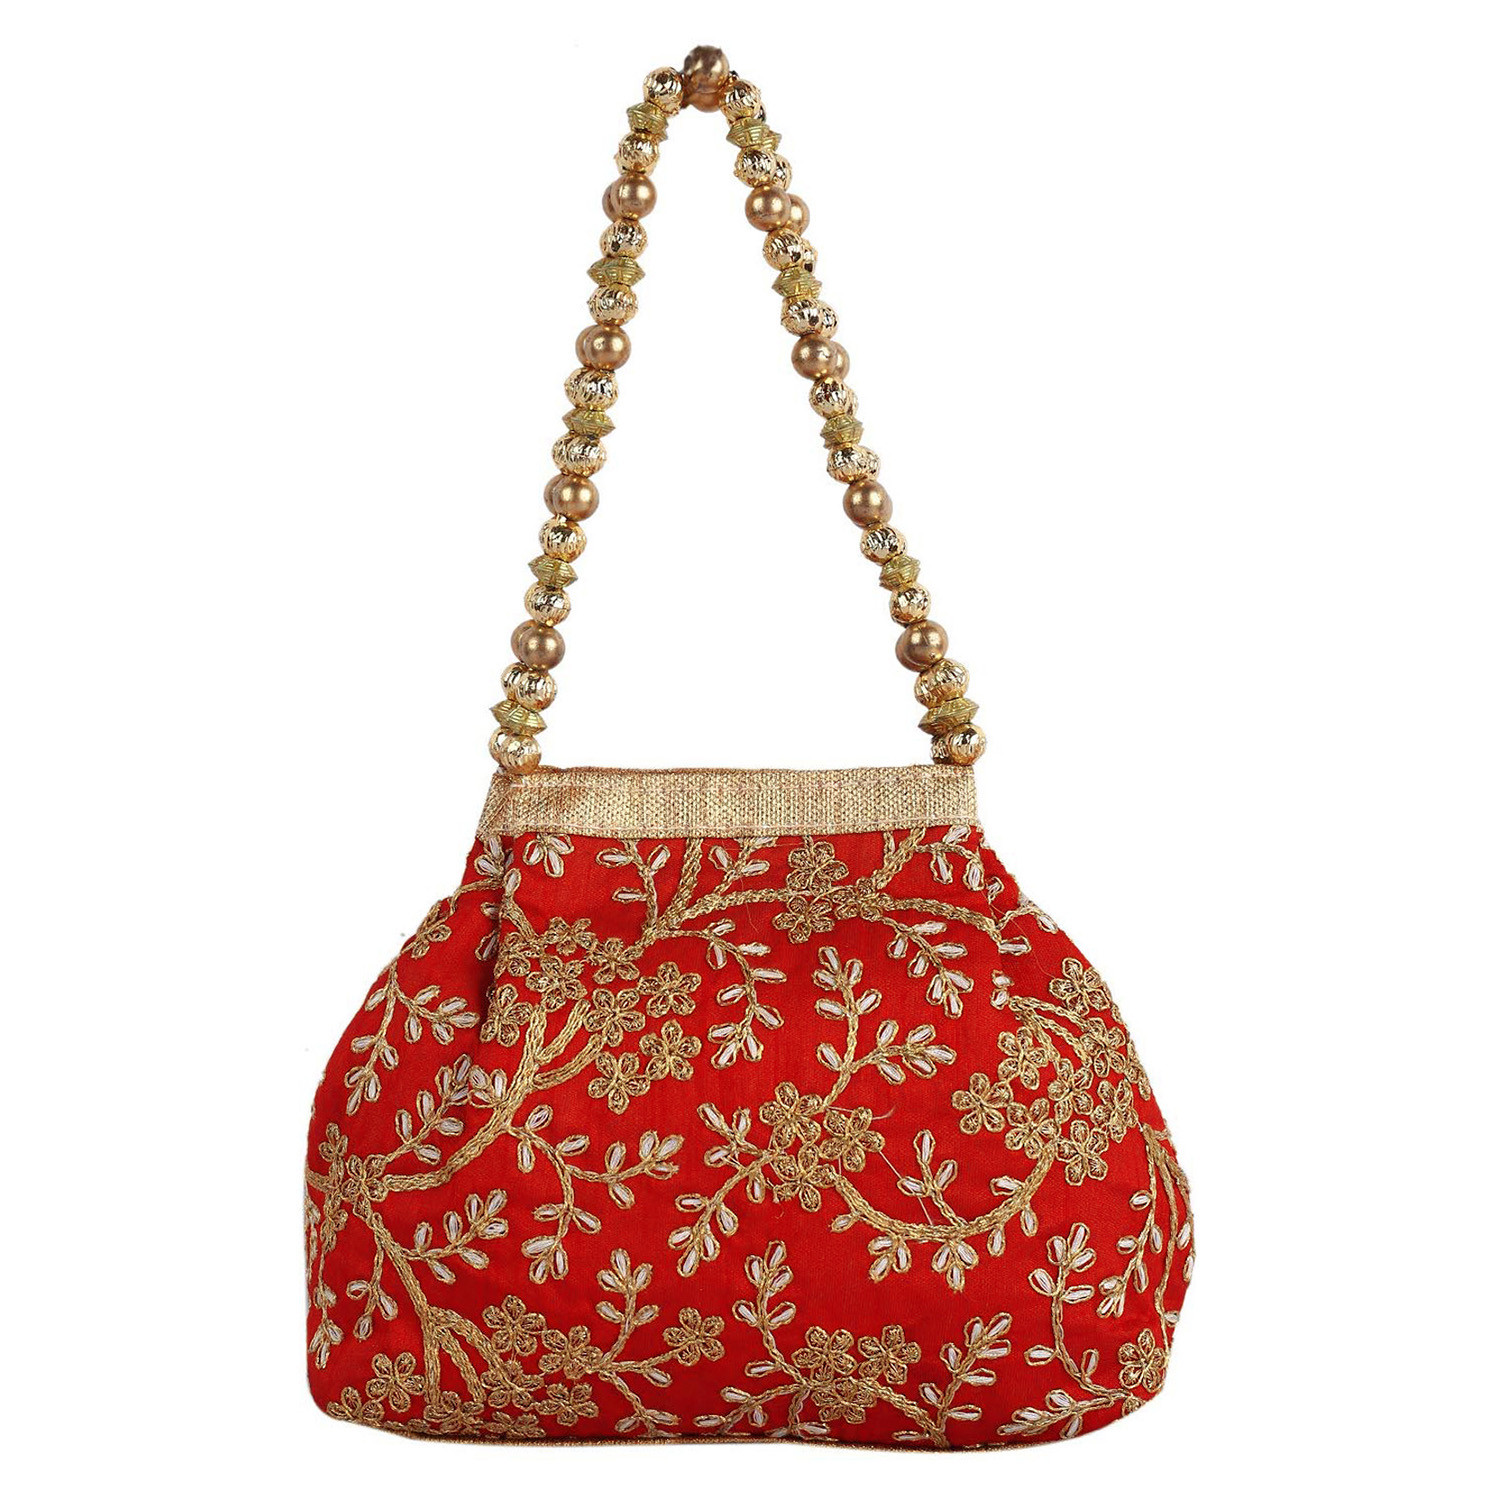 Kuber Industries Attractive Embroidery Polyester Hand Purse & Artificial Pearls Handle With 3 Magnetic Lock for Woman,Girls (Red)